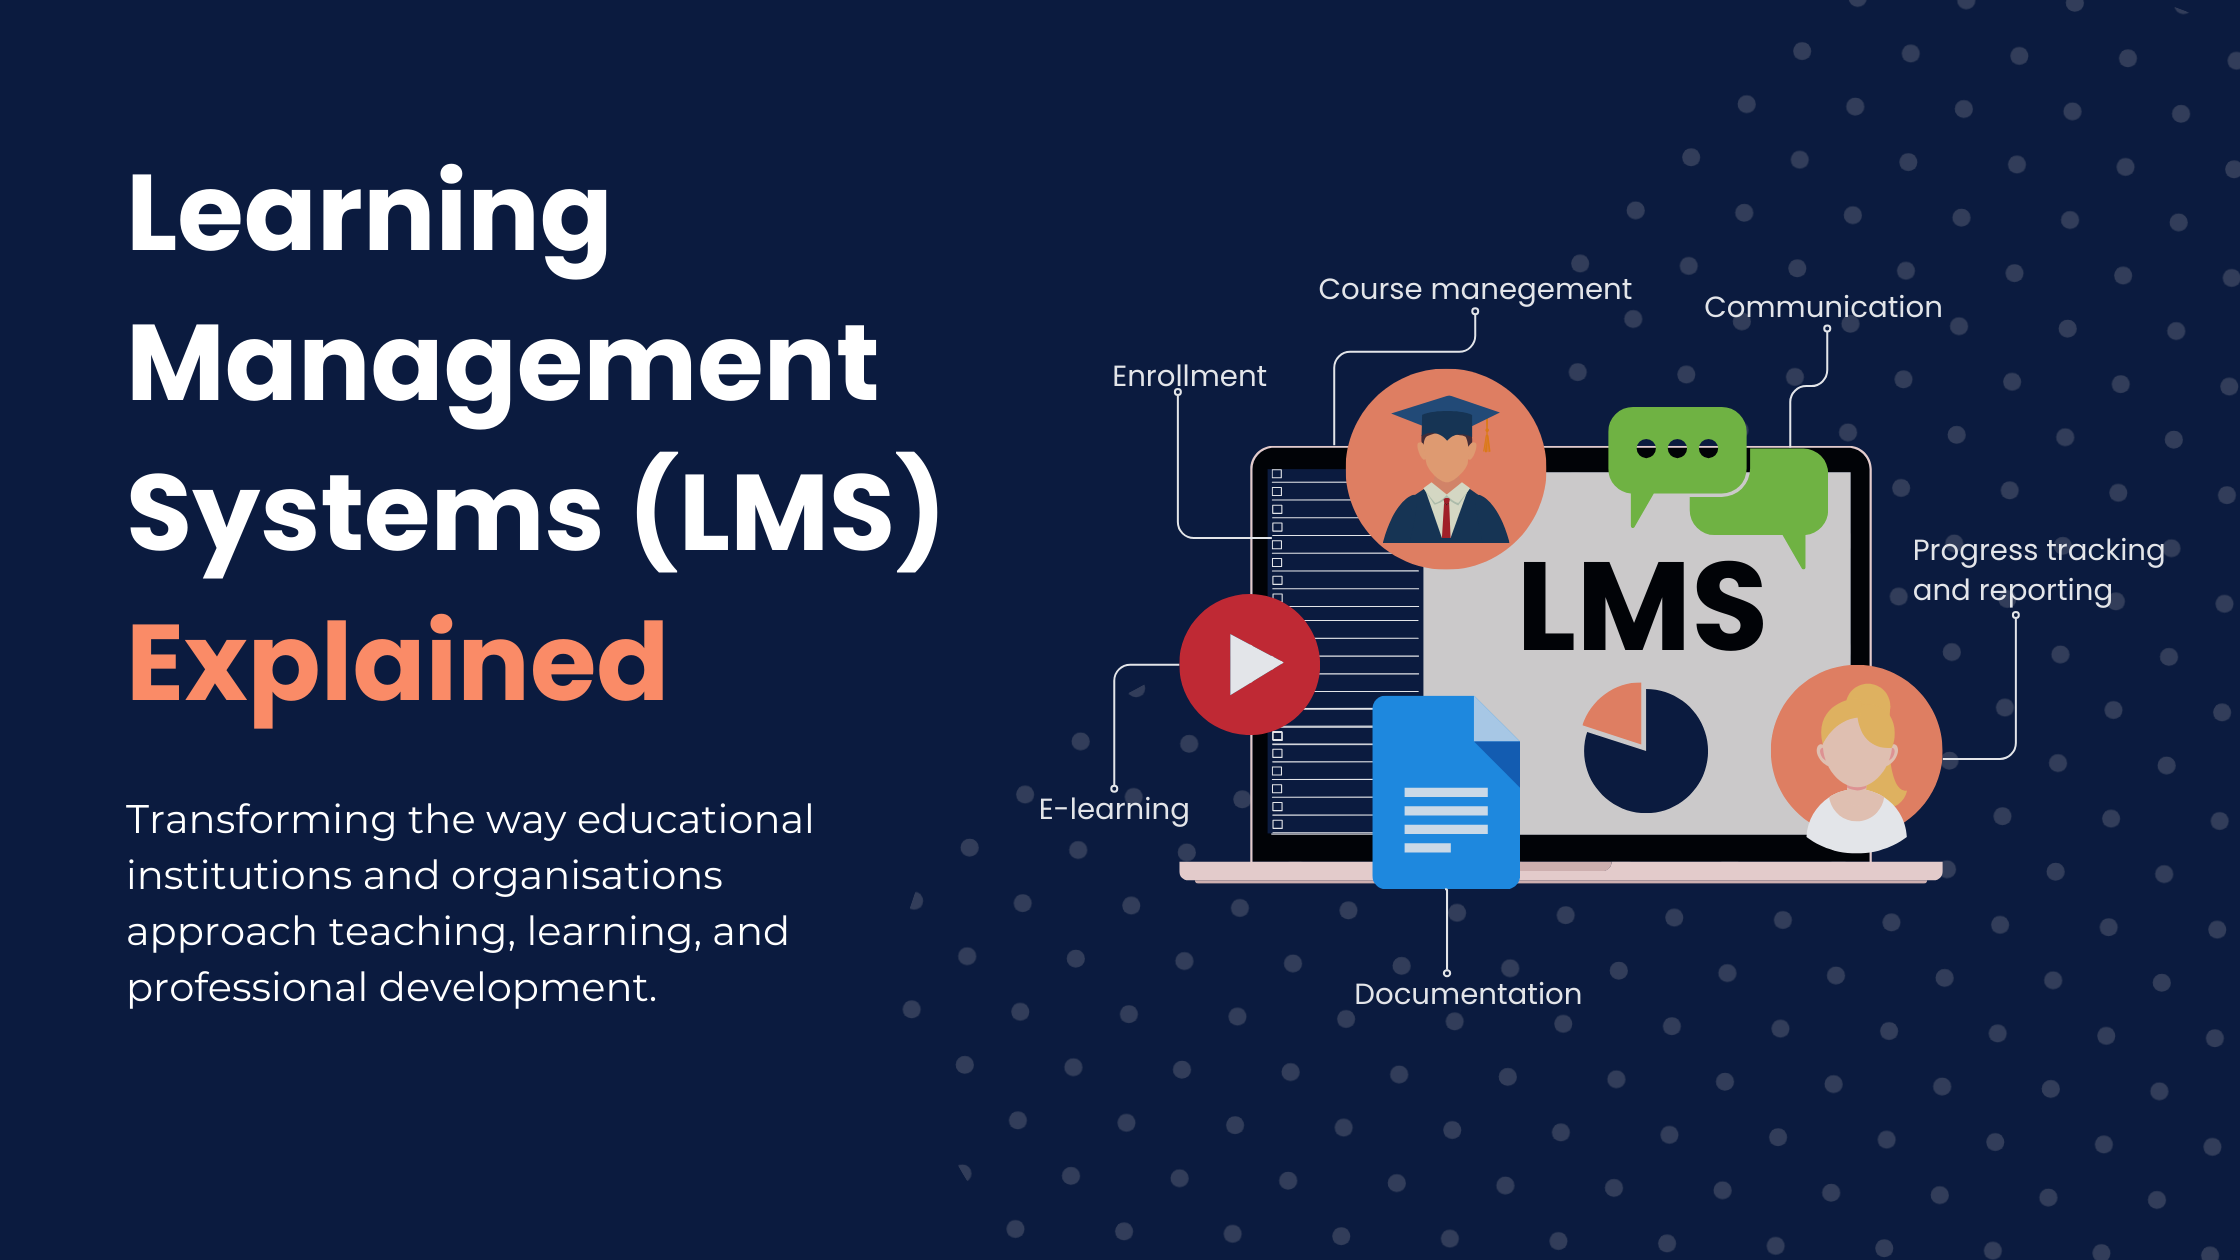 Learning Management Systems (LMS) Explained